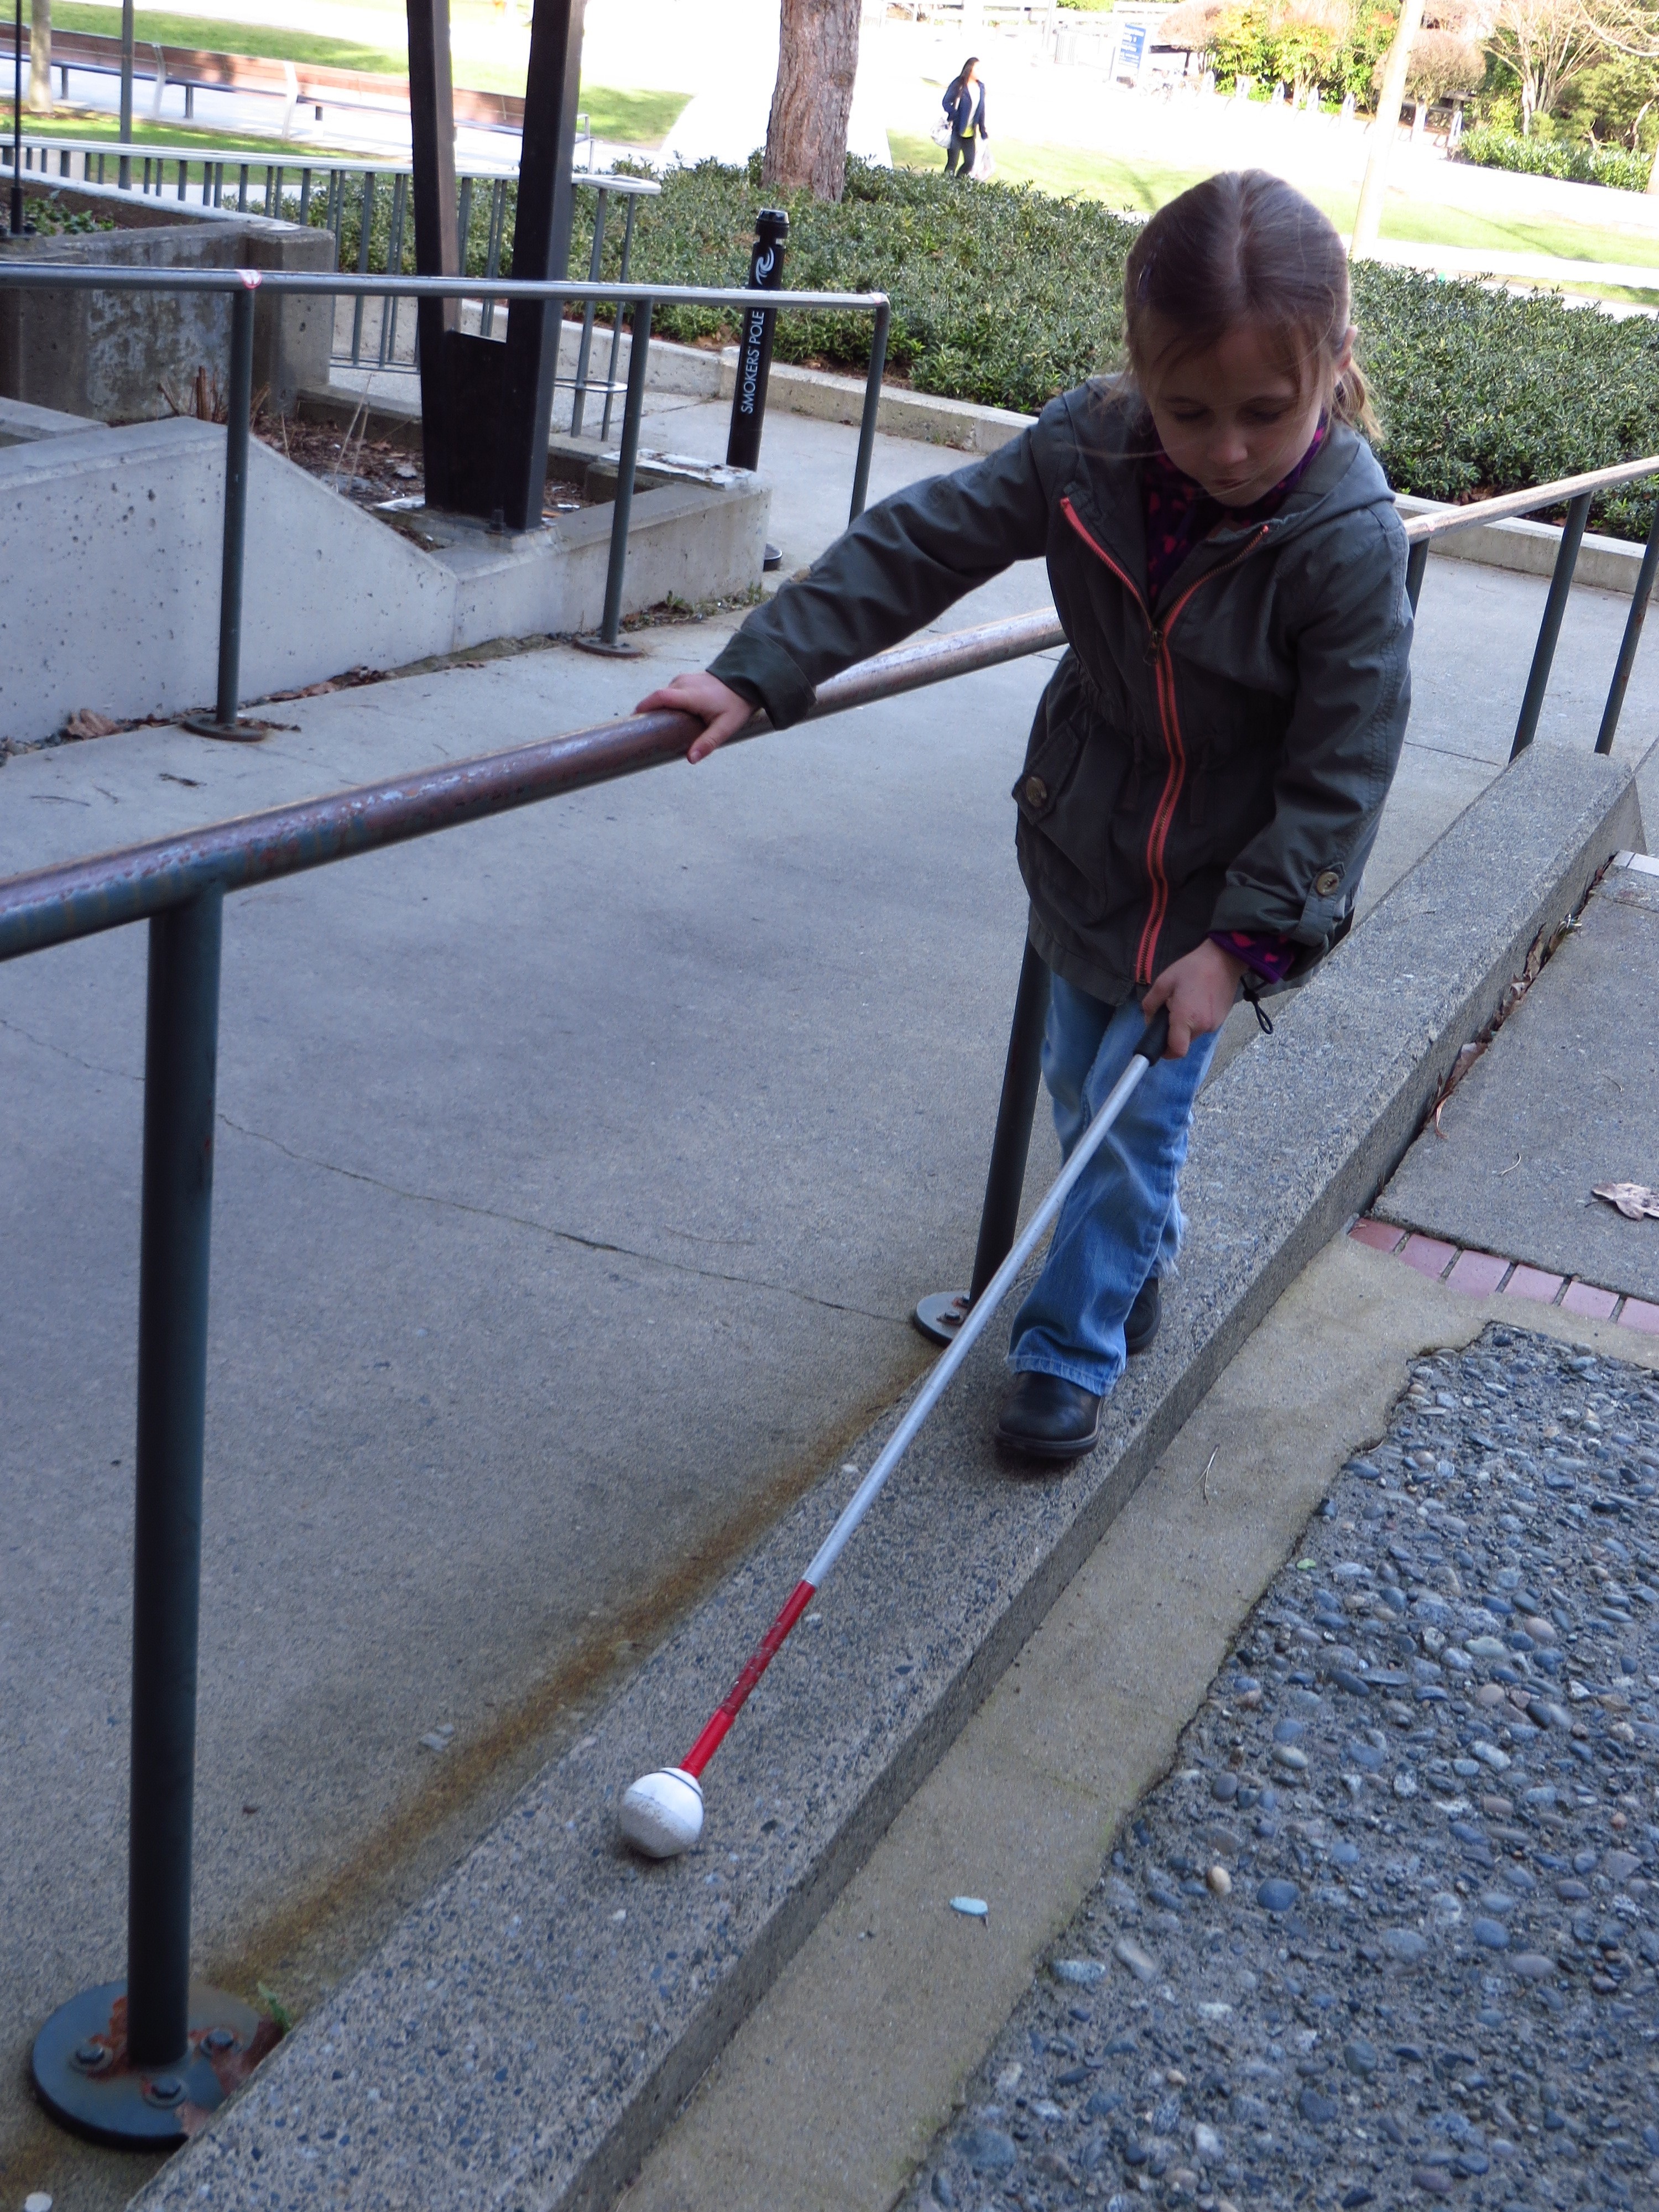 Photos shows a student using a mobility cane to navigate a narrow walkway.